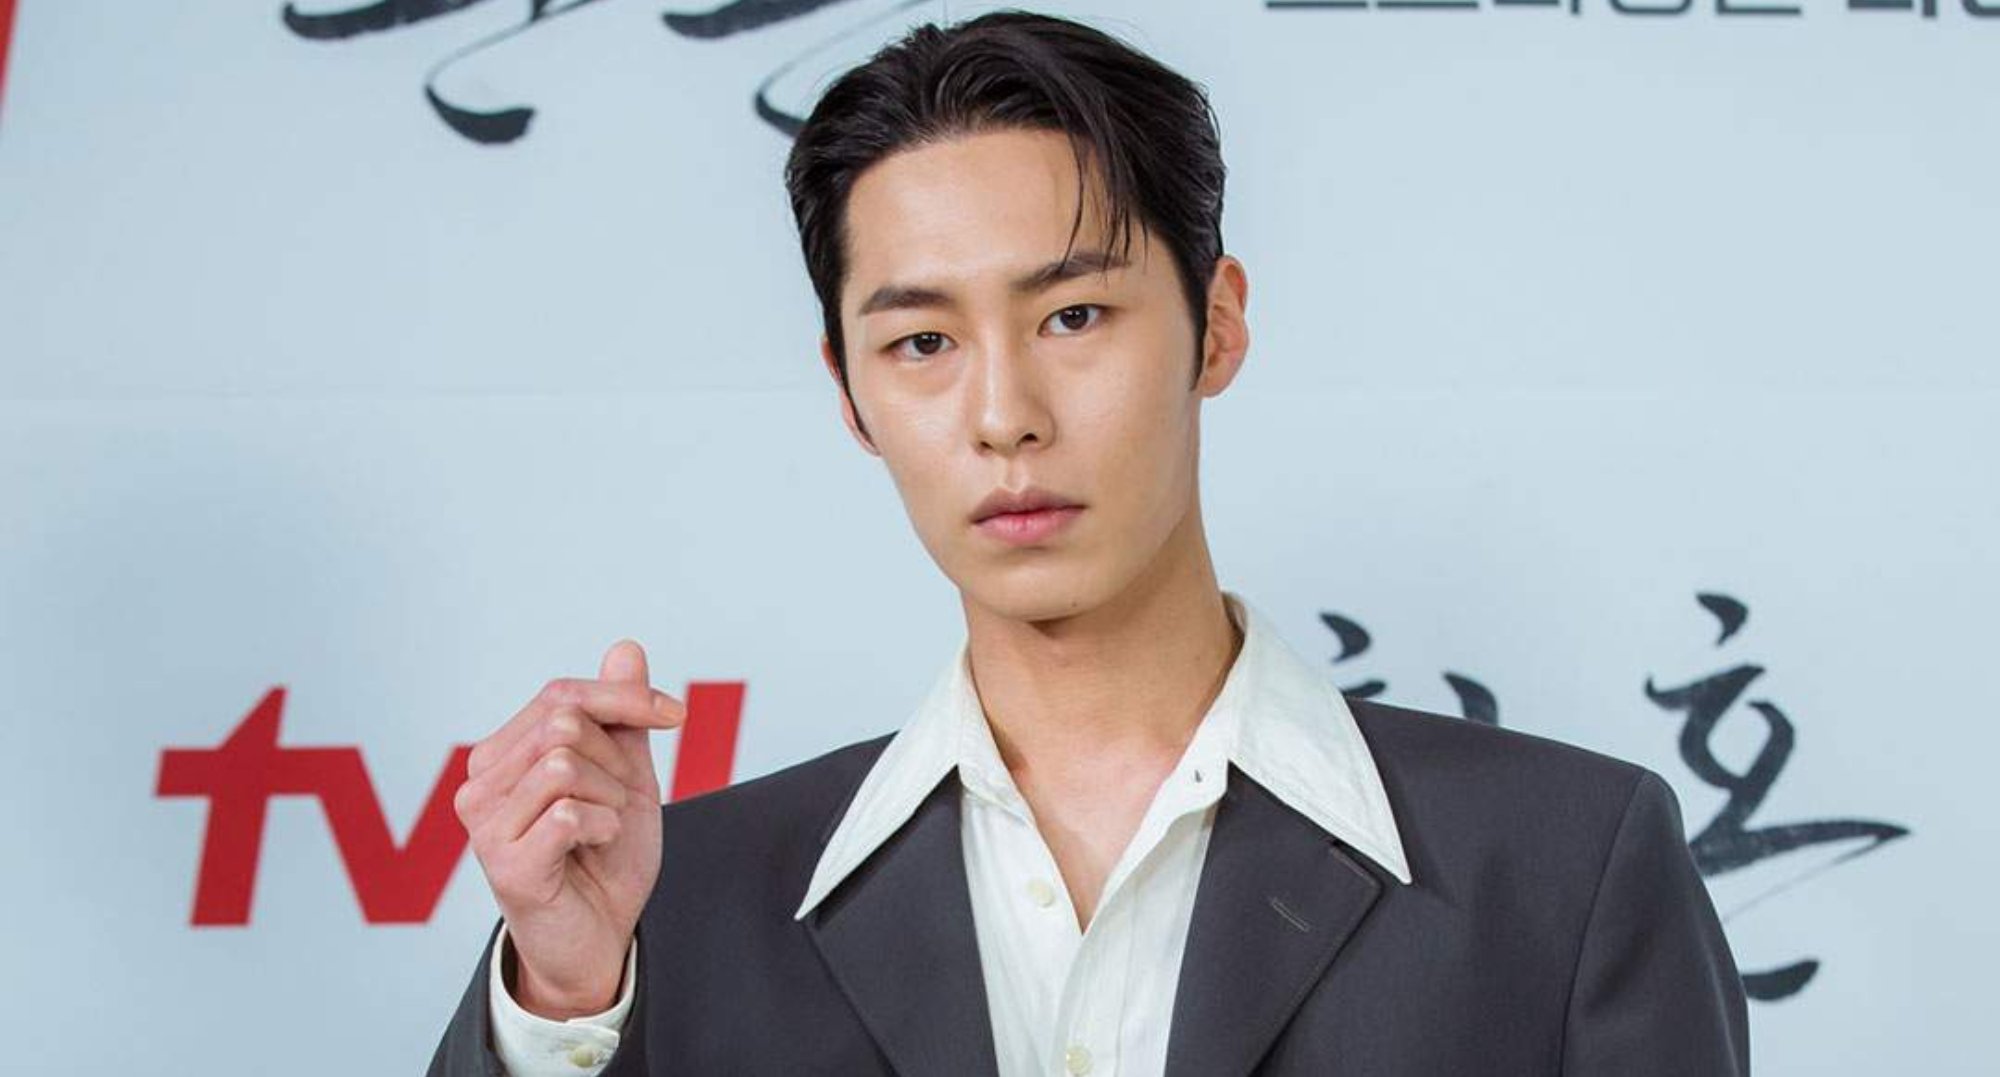 Royal Loader': Lee Jae-wook Among the Actors Cast in K-Drama With 20  Billion Won Investment